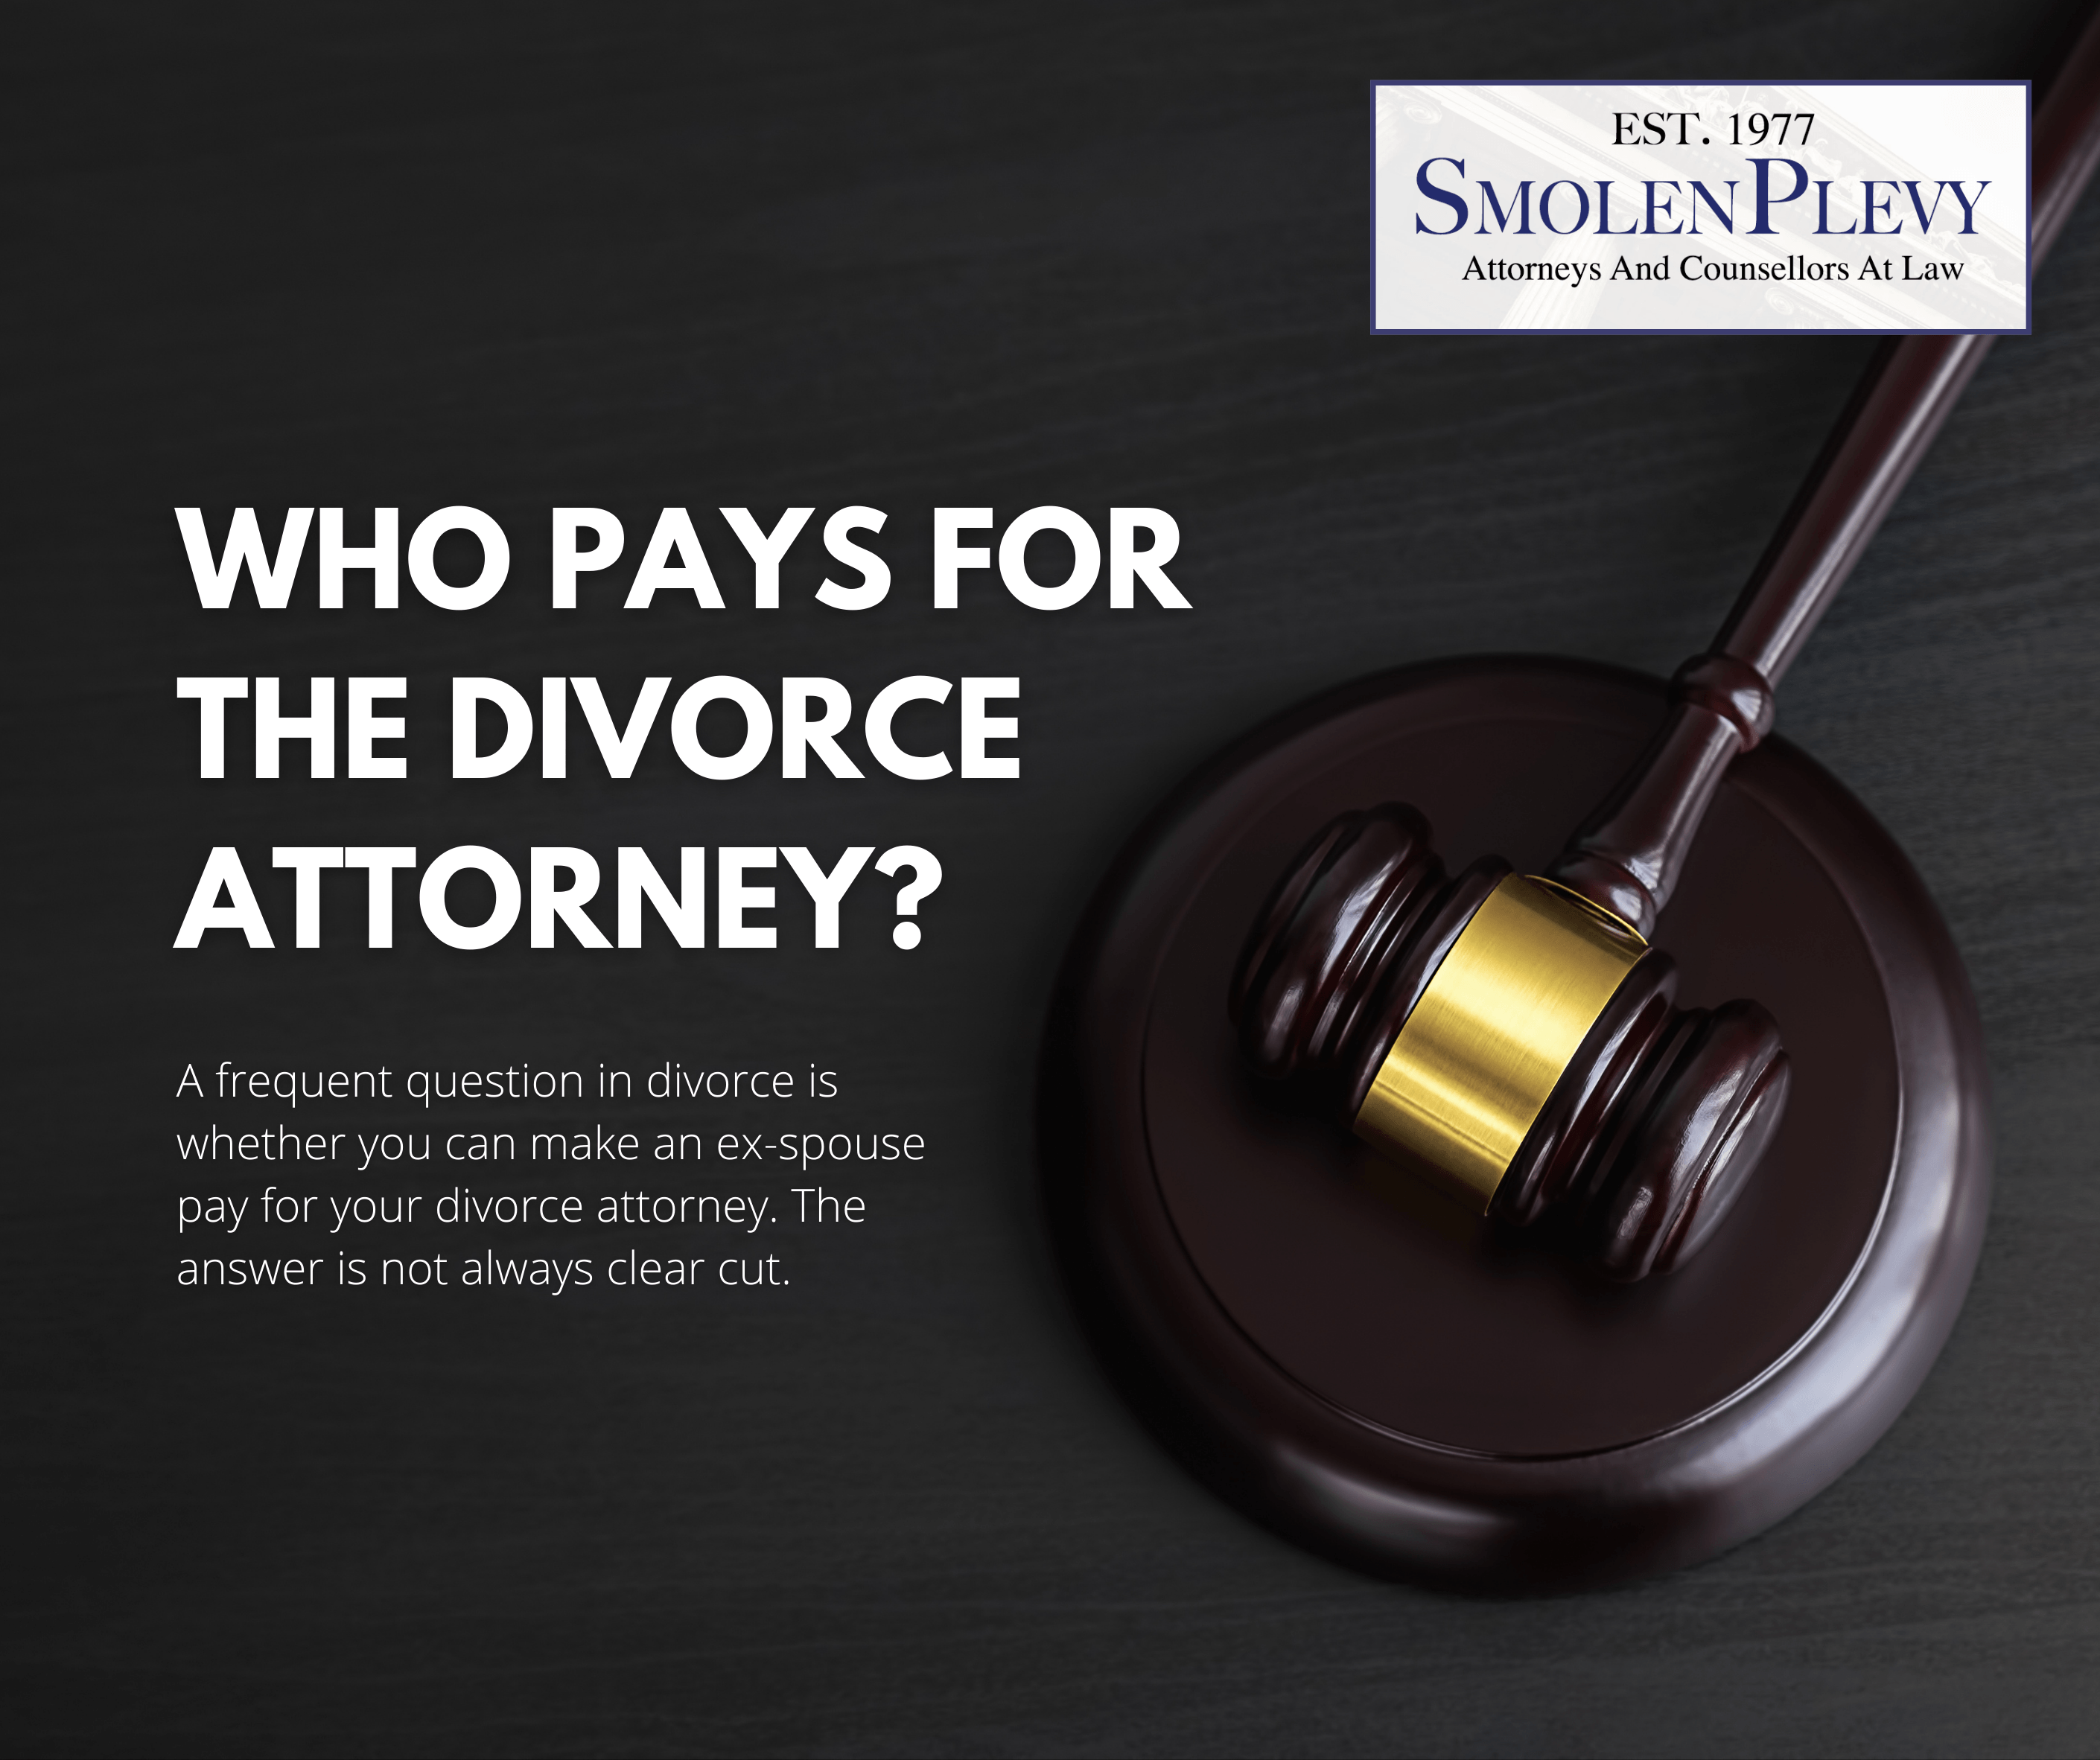 Who Pays for the Divorce Attorney?